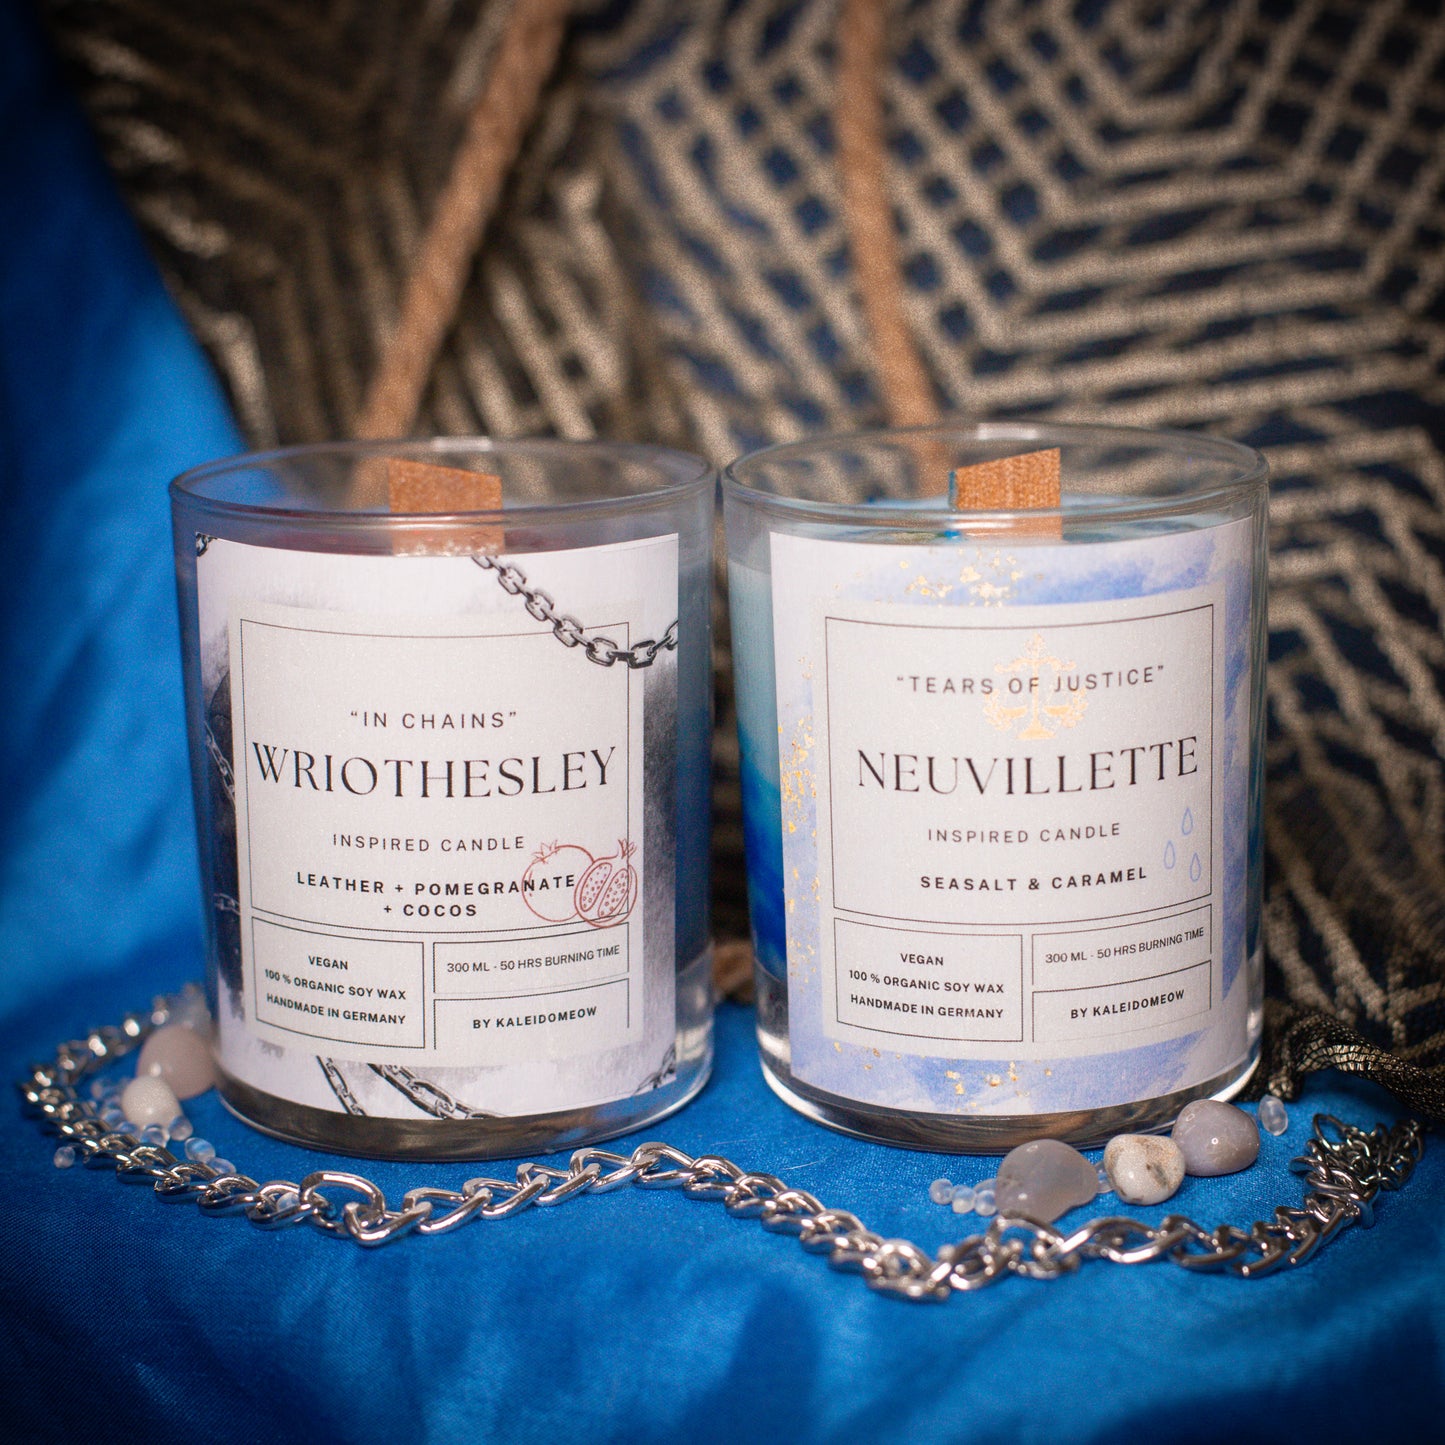 Wriothesley inspired candle - 'In Chains' Genshin inspired scented candle 300 ML